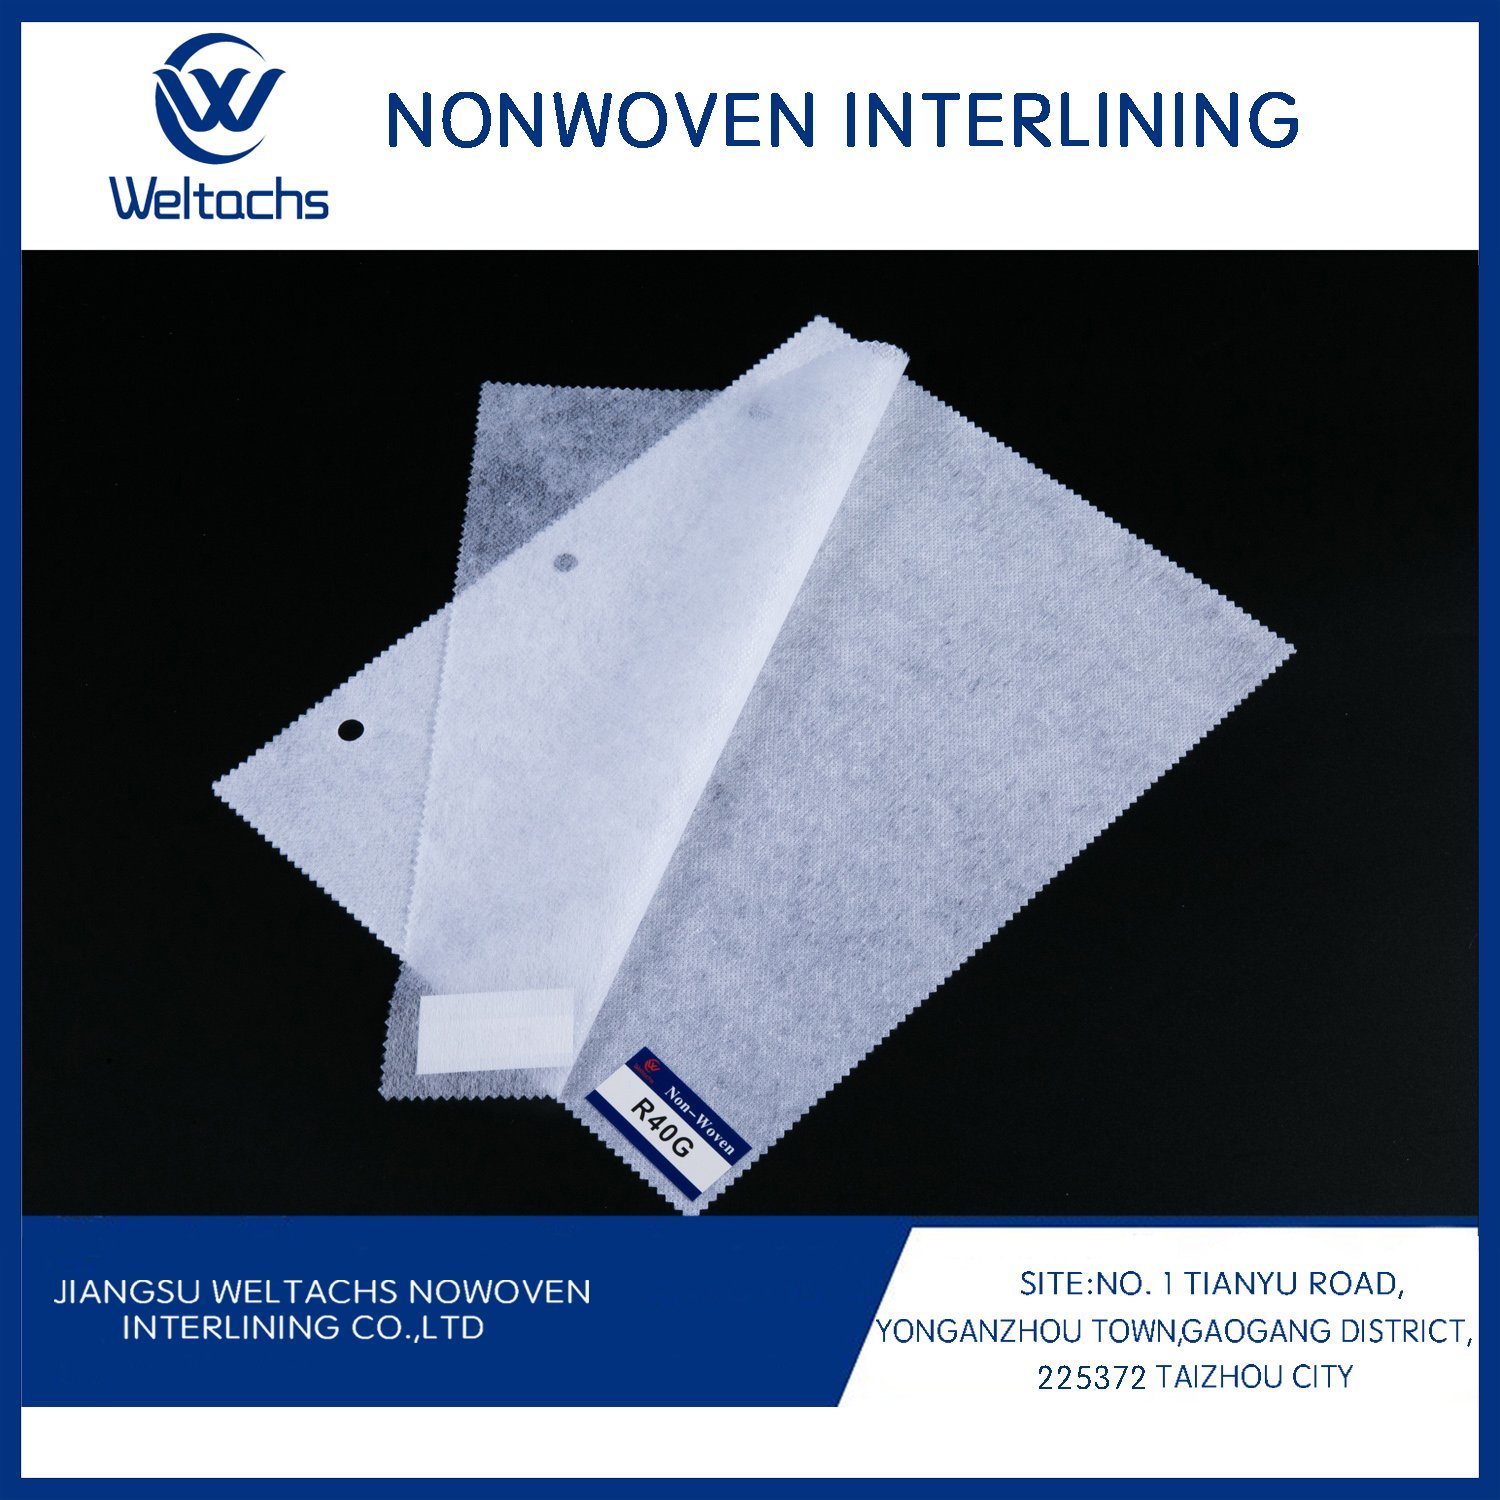 1050hf Non Woven Fusing Interlining Gum Stay Chemical Bond Garment Fusible Interlining Hf Quality